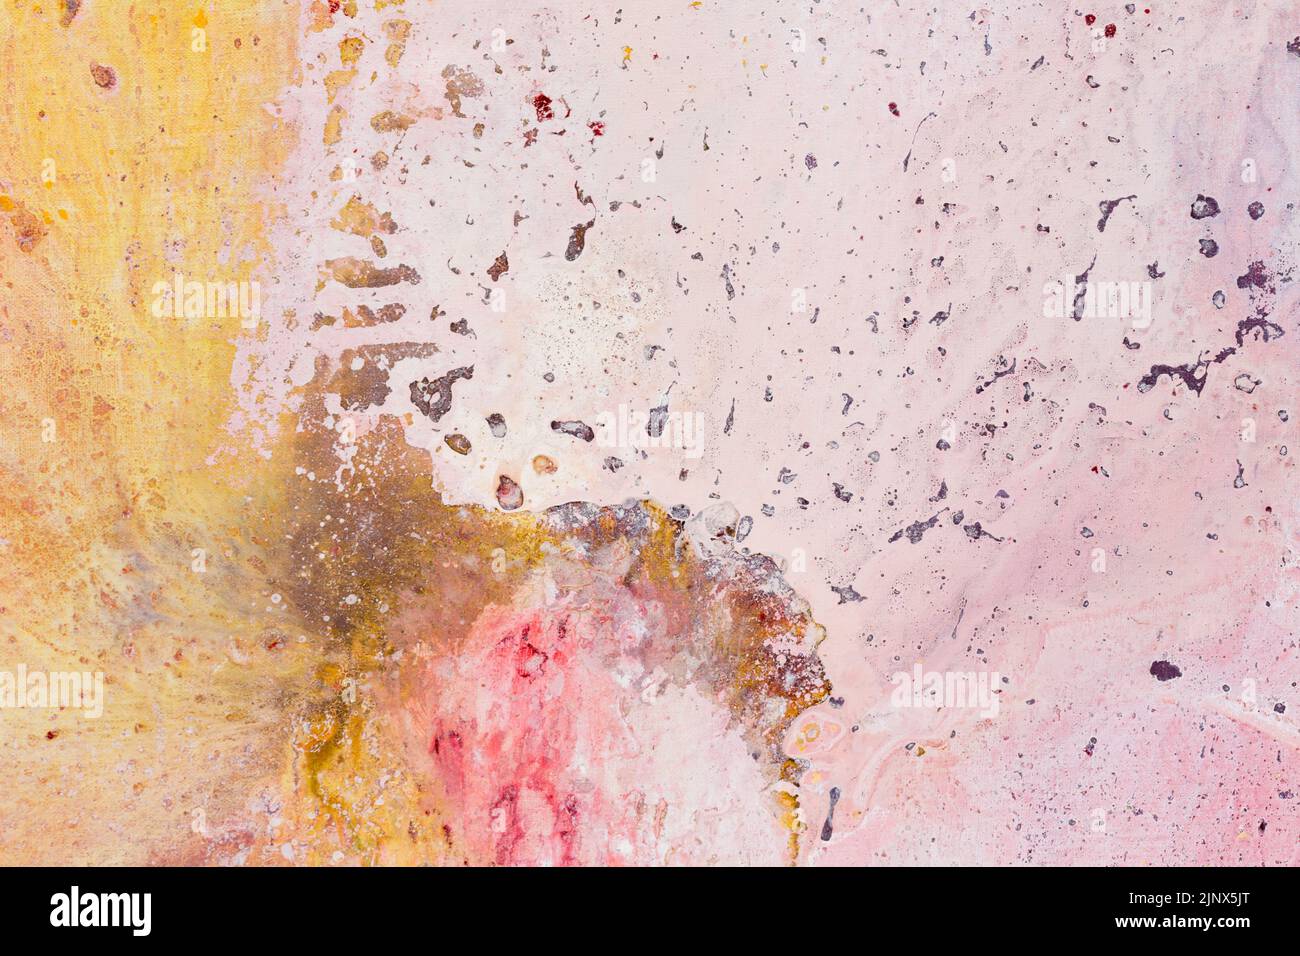 Pink, orange and beige abstract art painting. Oil painting. Stock Photo